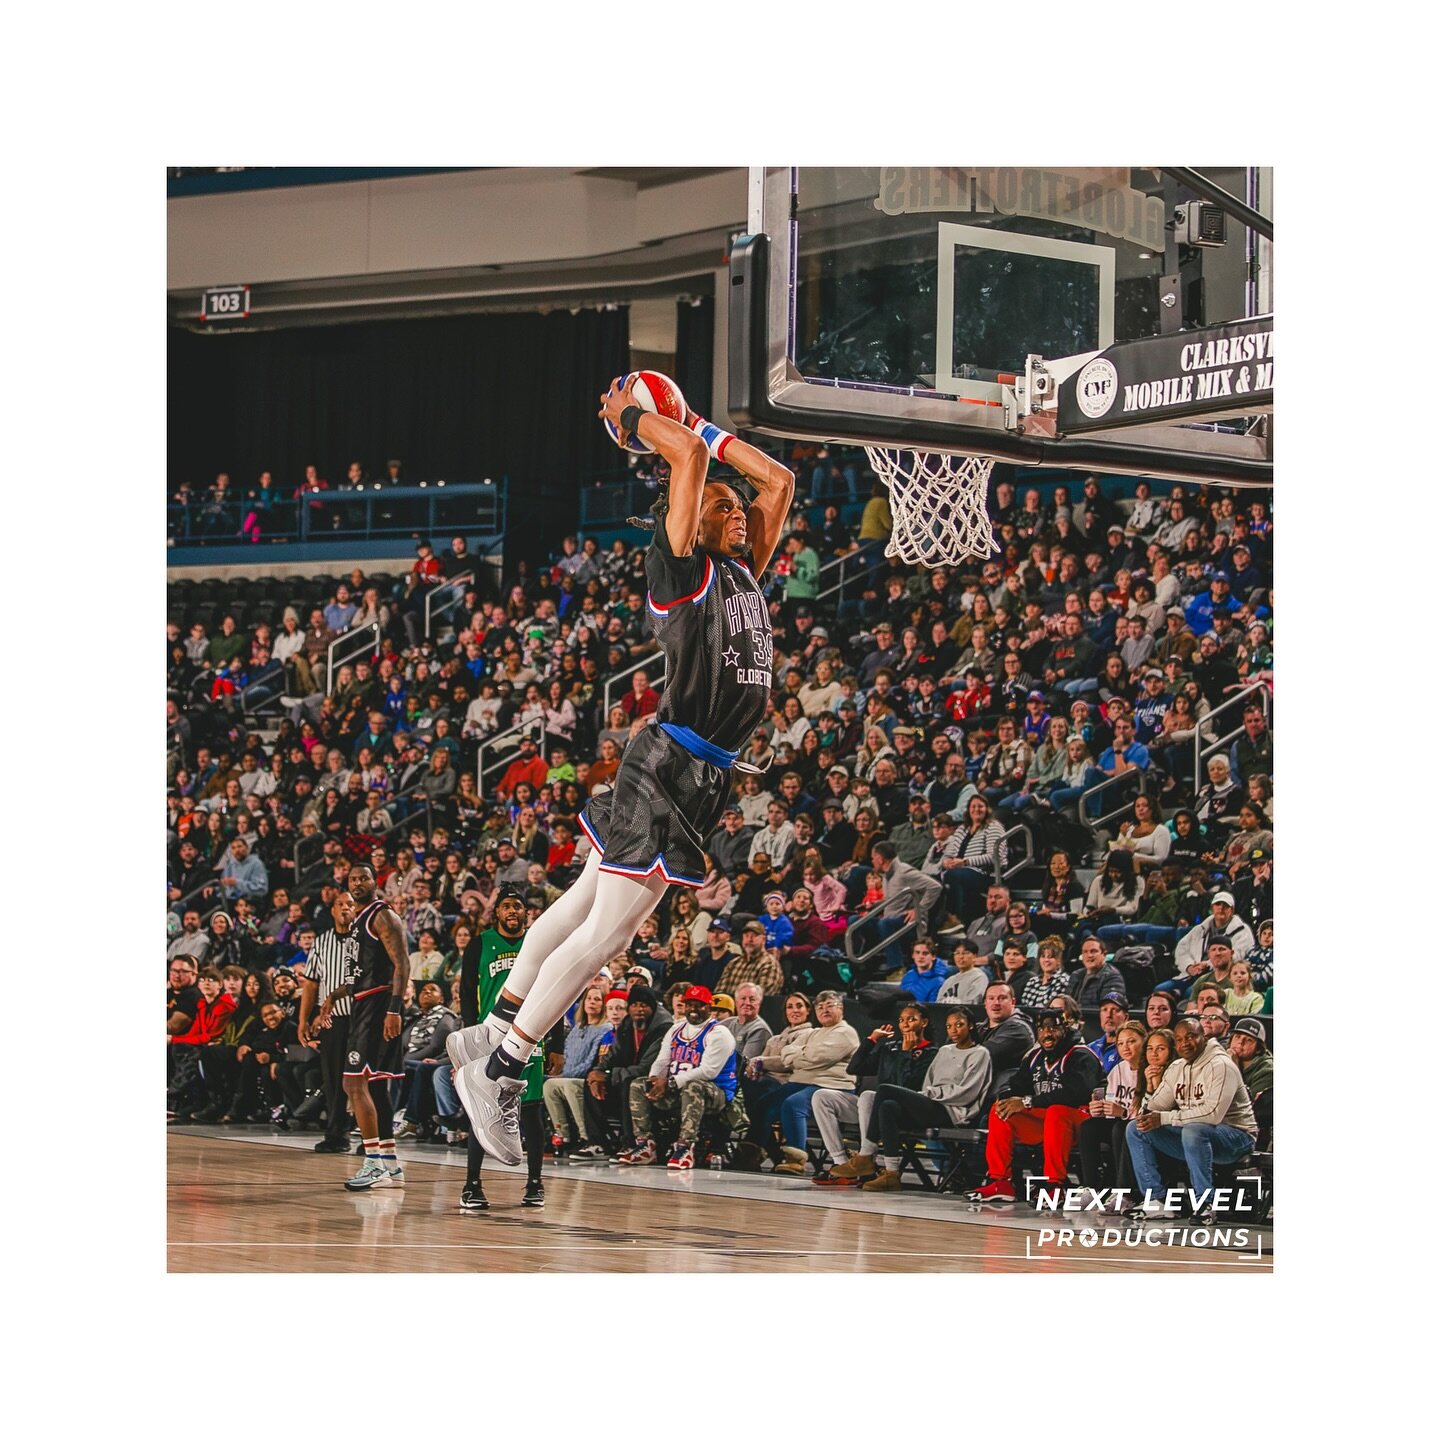 The Harlem Globetrotters at F&amp;M Bank Arena

Contact us online at: www.nextlevelproductions.studio
.
.
.

#nextlevelproductions #fmbankarena #fordicecenter #harlemglobetrotters #2024 #2024worldtour #basketball #harlemglobetrotters2024 #photography